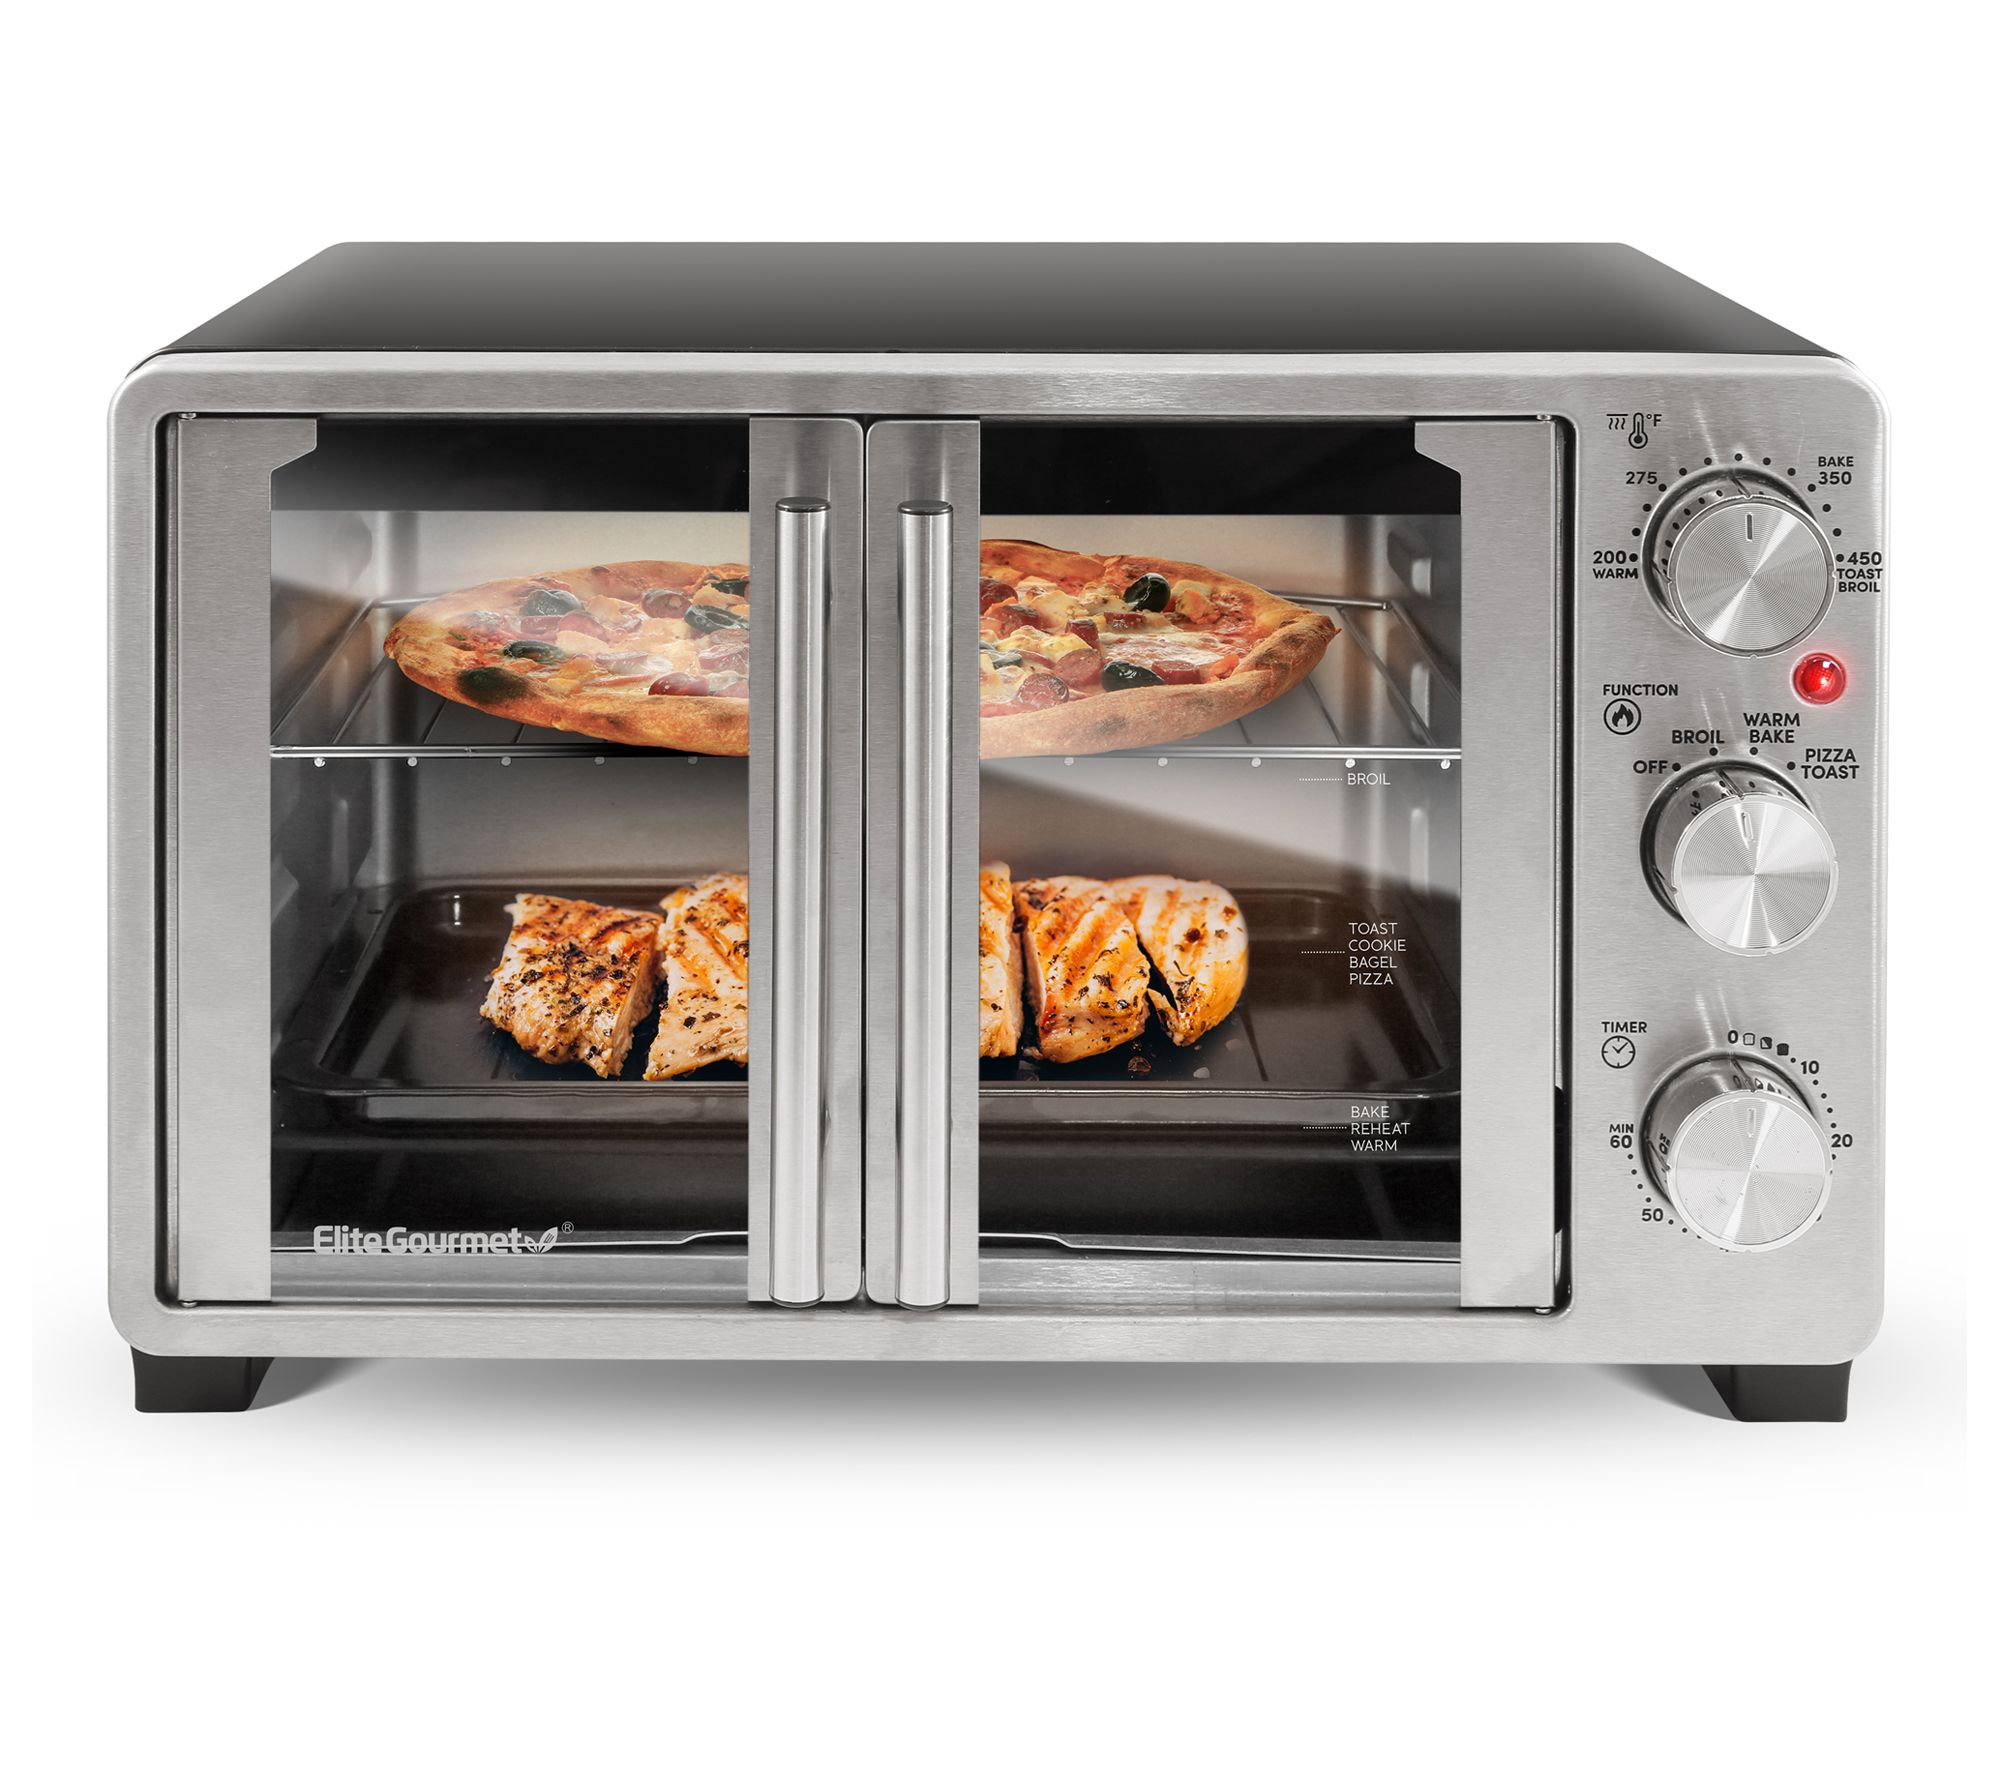 VENTRAY Convection Countertop Toaster Mini Oven Master, 26QT Electric Ovens,  1 unit - Harris Teeter